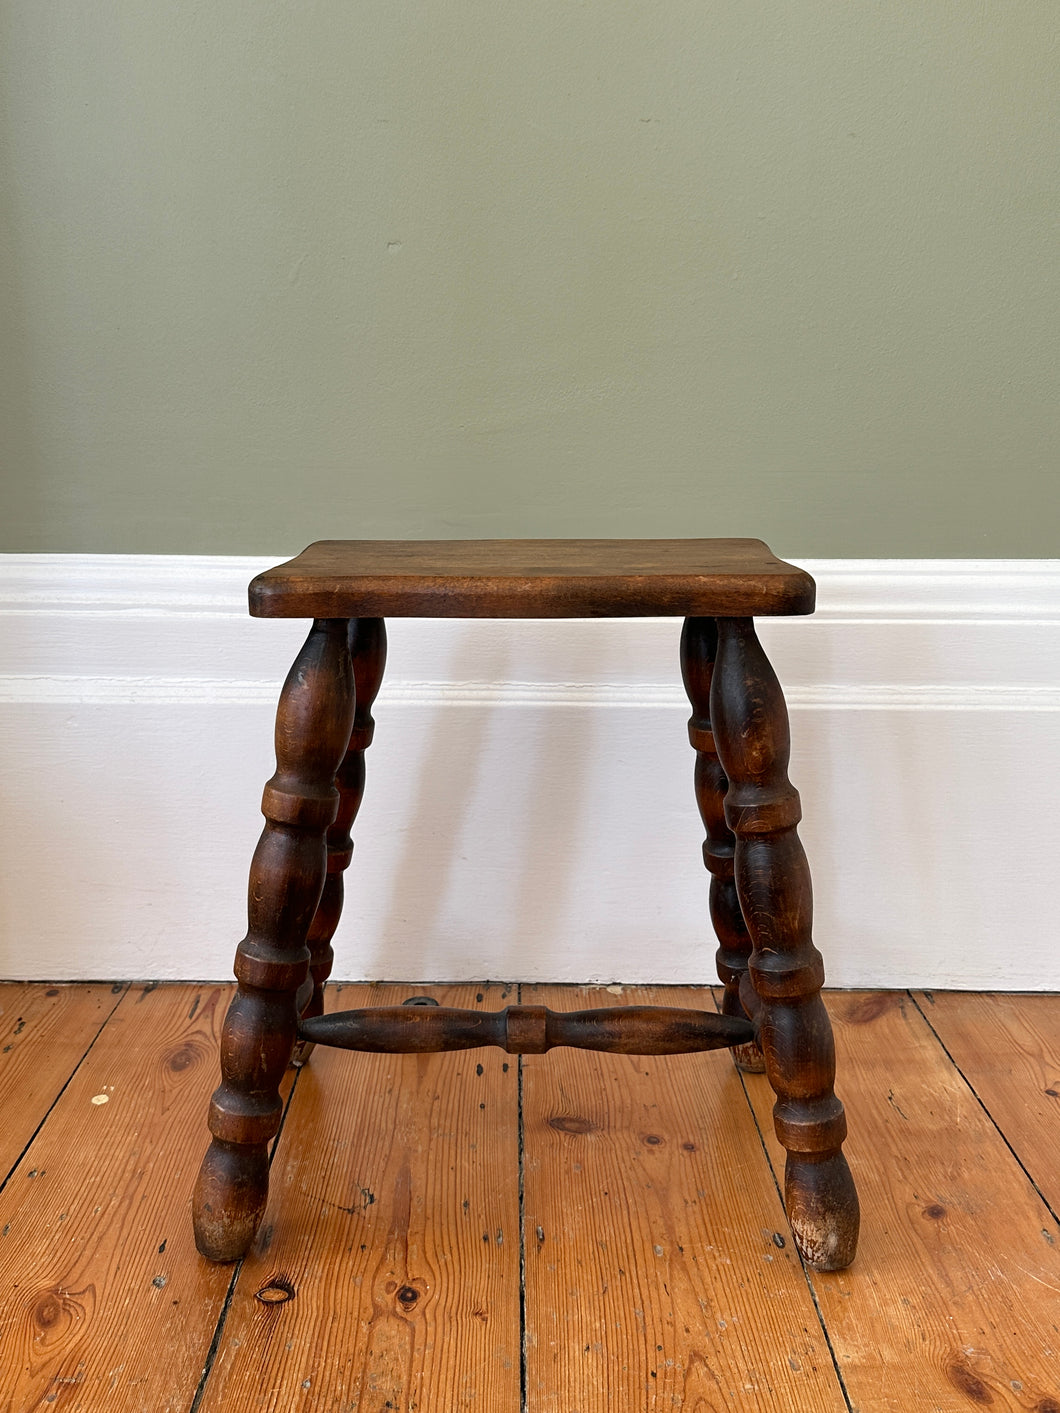 Antique French Oak Stool With Wavy Top And Bobbin Turned Legs